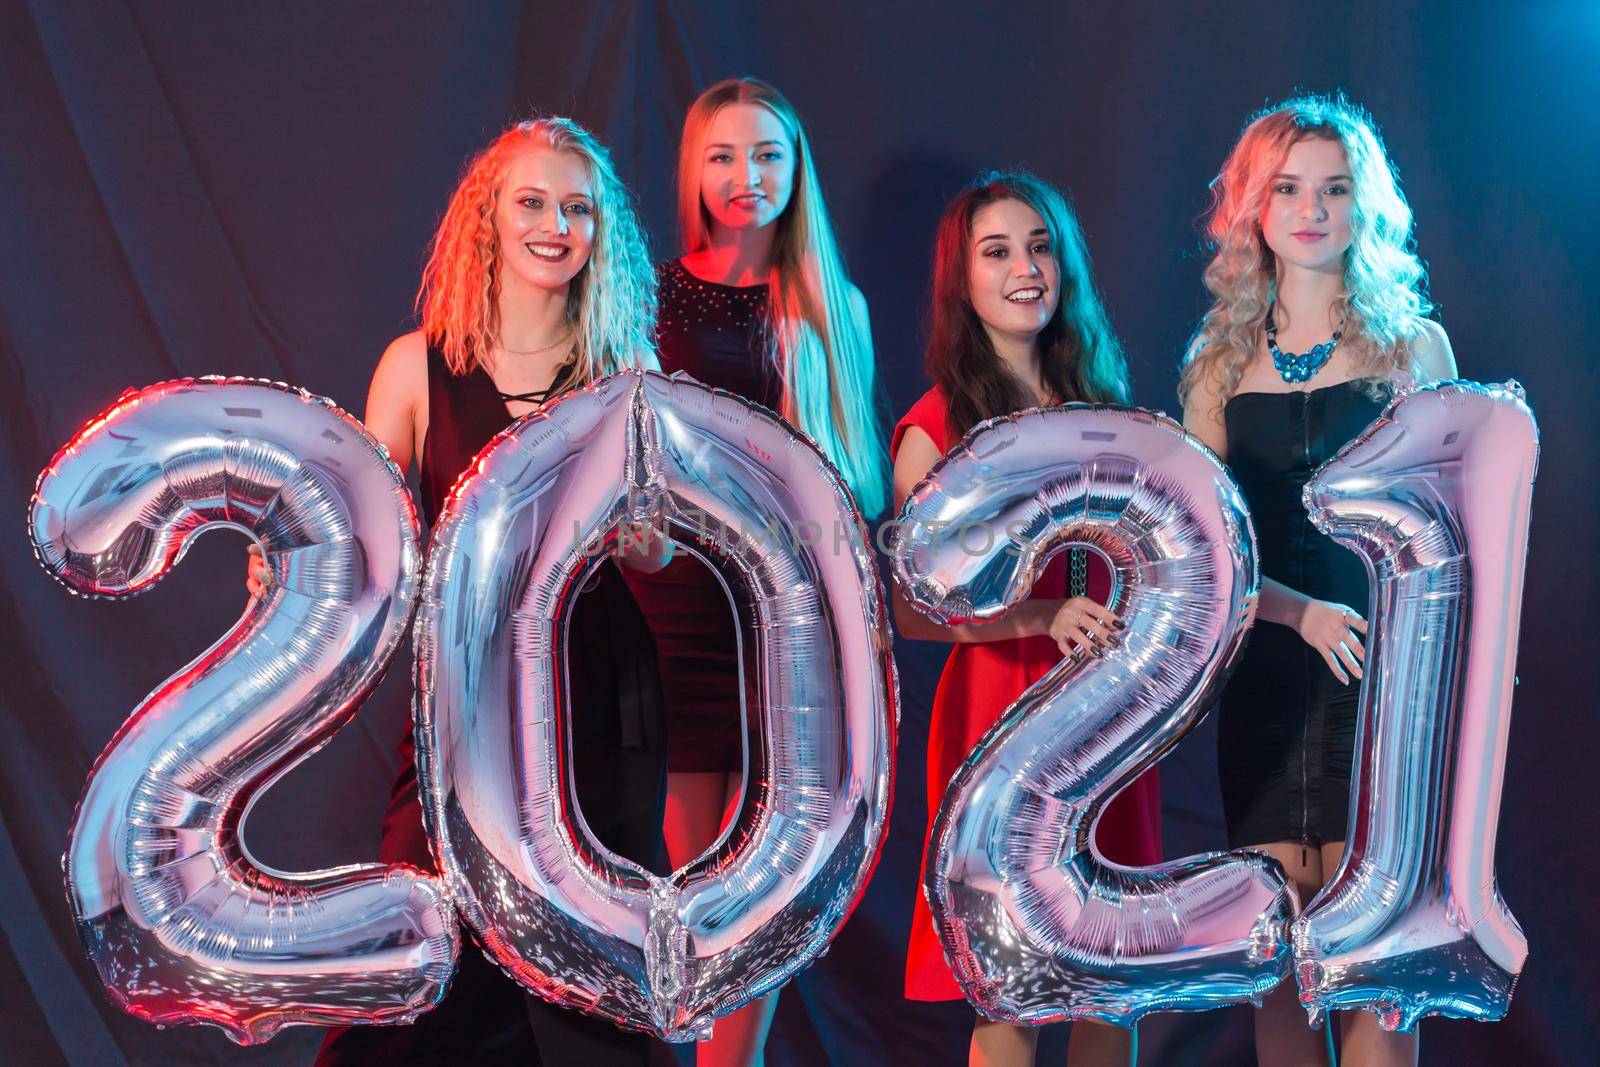 Party and new year holidays concept - cheerful young women celebrating new years eve 2021